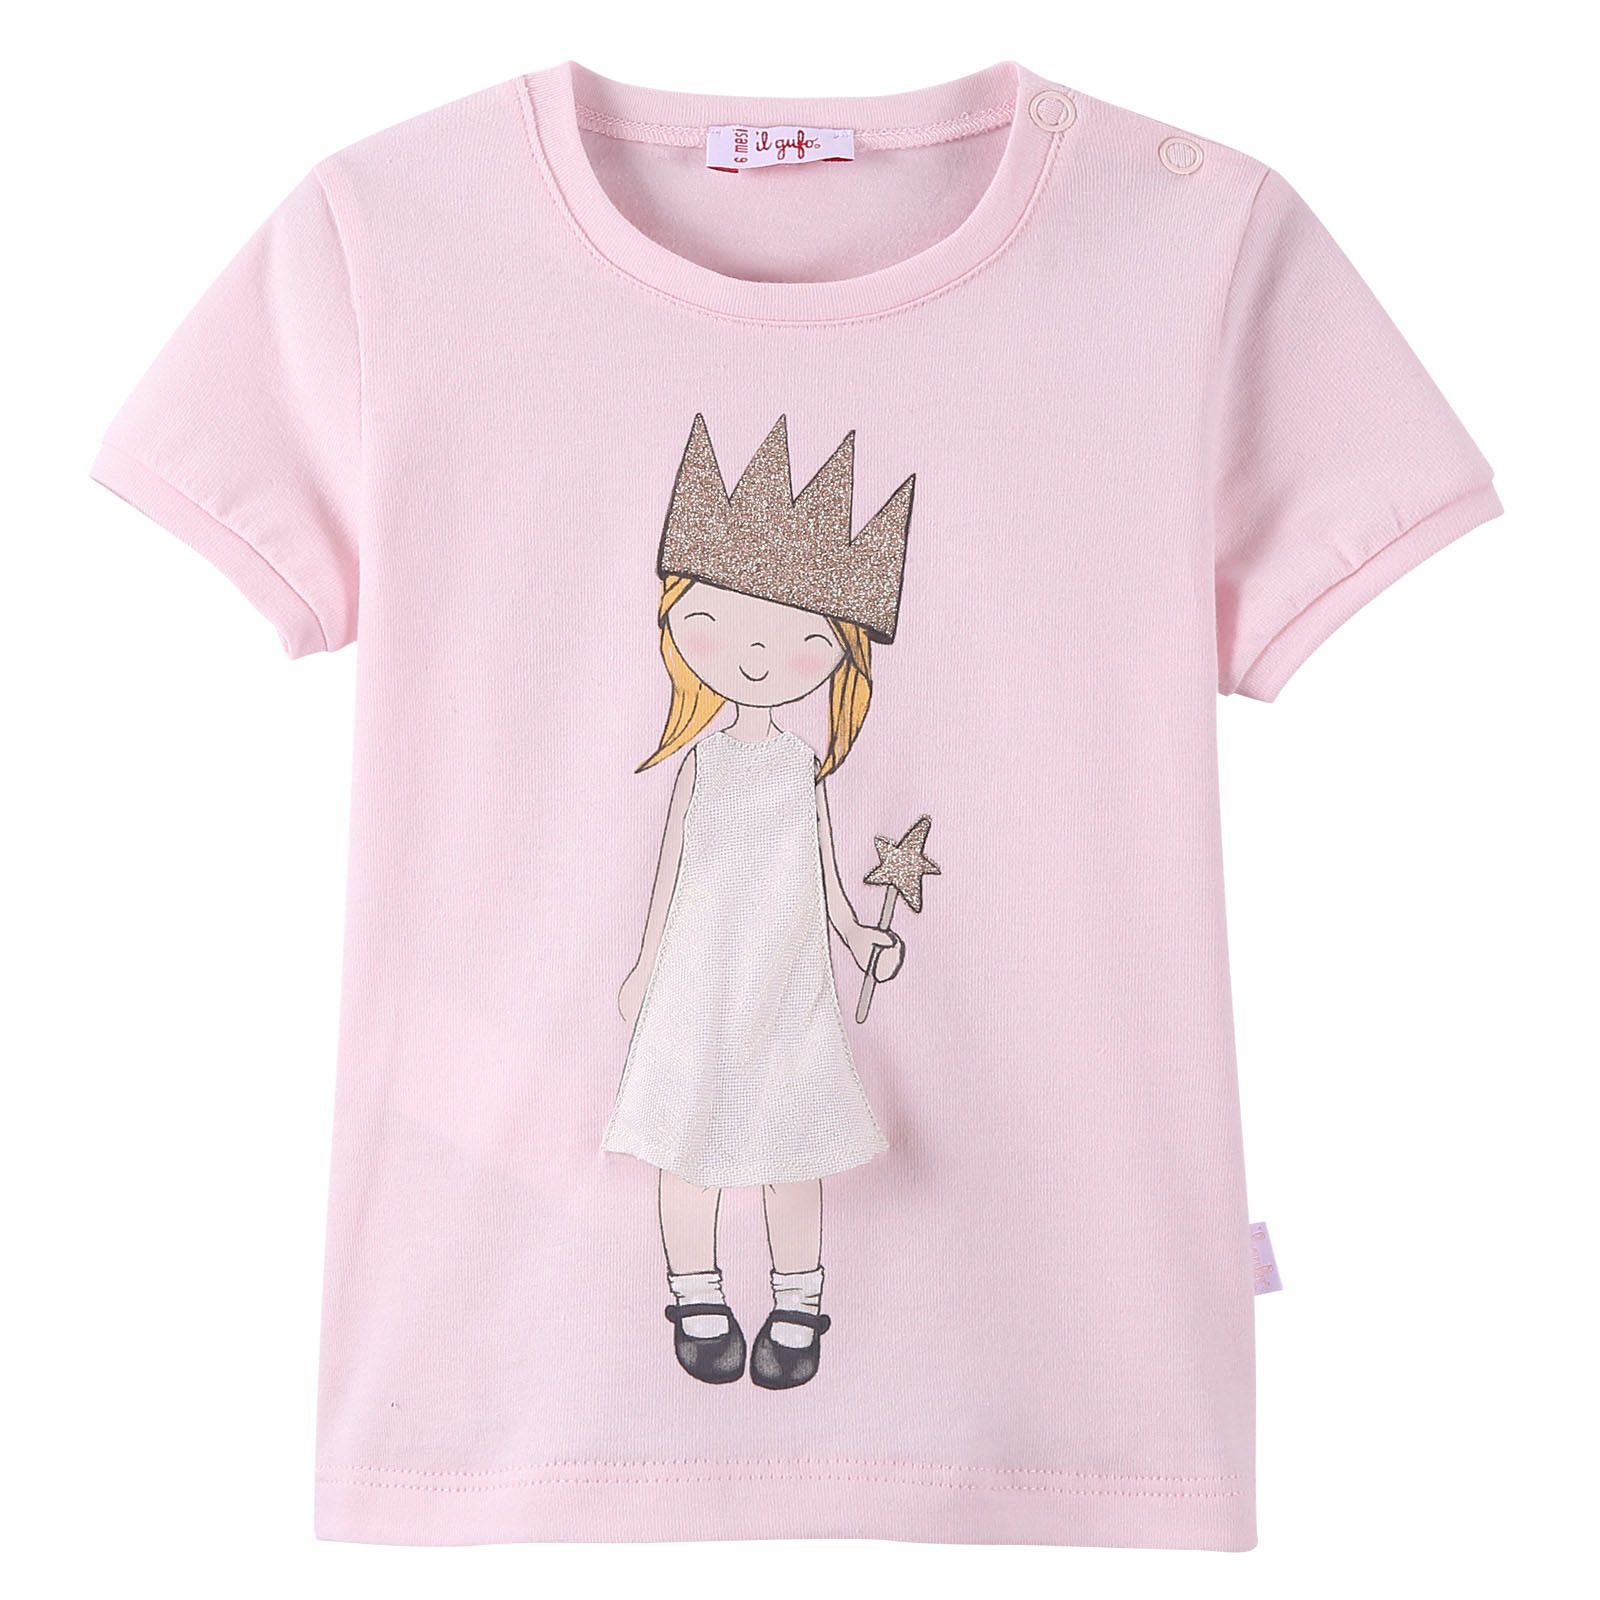 Girls Light Pink Fairy Printed T-Shirt With Ribbed Cuffs - CÉMAROSE | Children's Fashion Store - 1